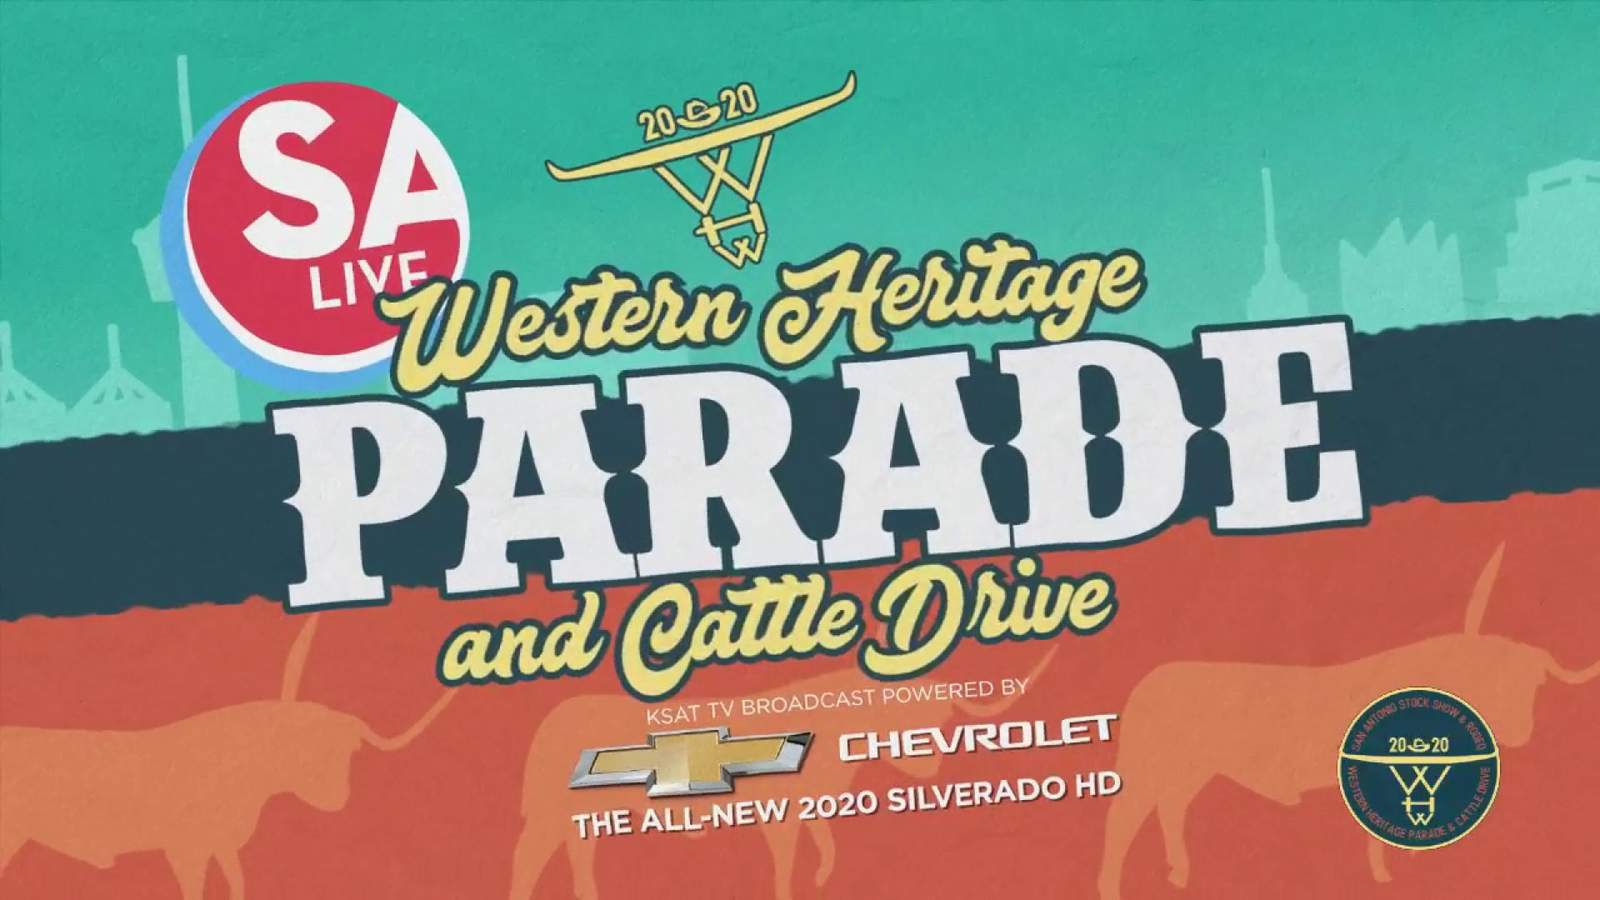 Watch the Western Heritage Parade and Cattle Drive, plus KSAT’s Ursula Pari livestreaming from horseback